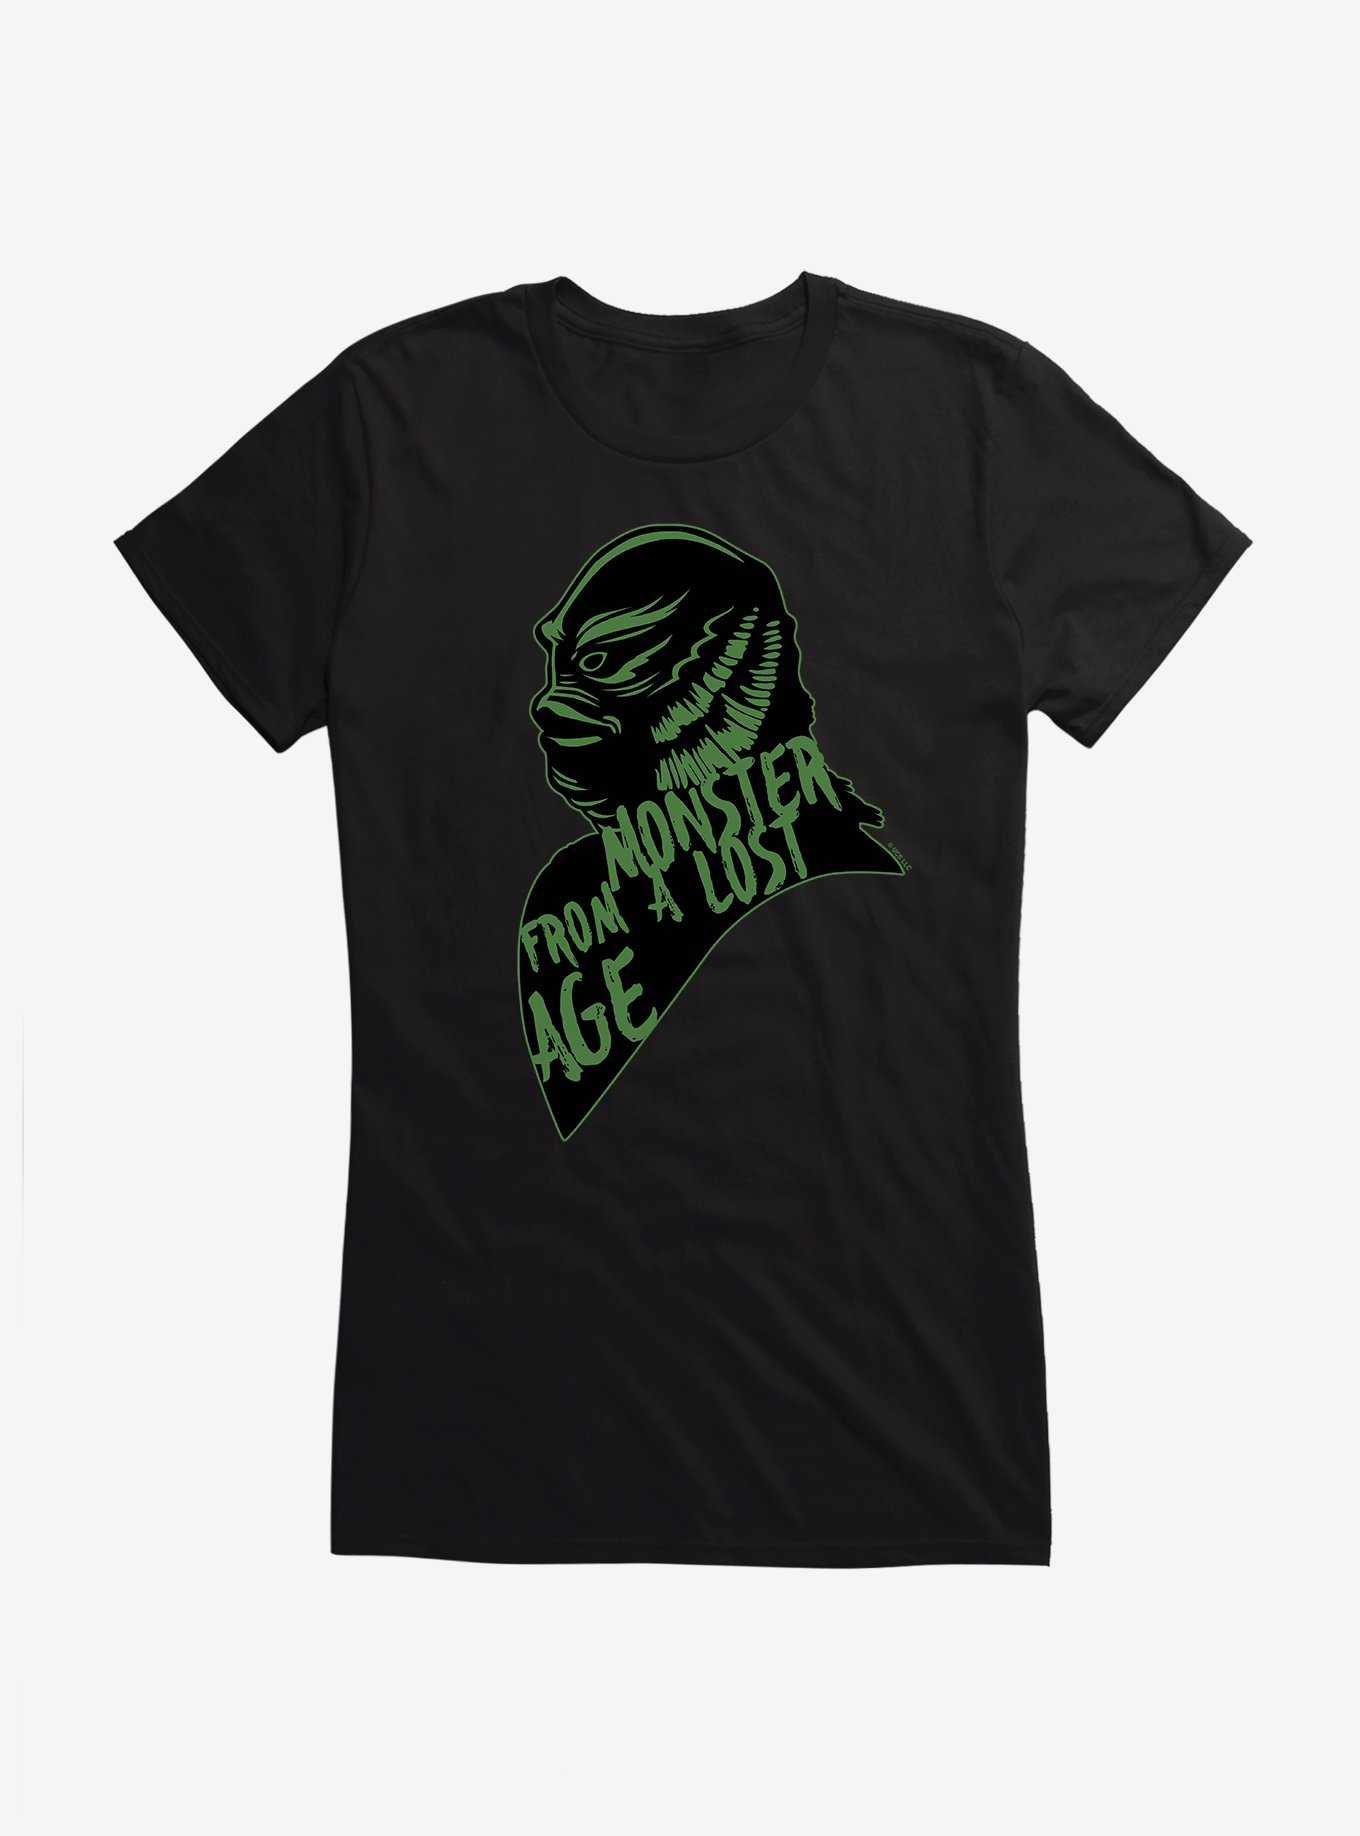 Universal Monsters Creature From The Black Lagoon Monster From a Lost Age Girls T-Shirt, BLACK, hi-res